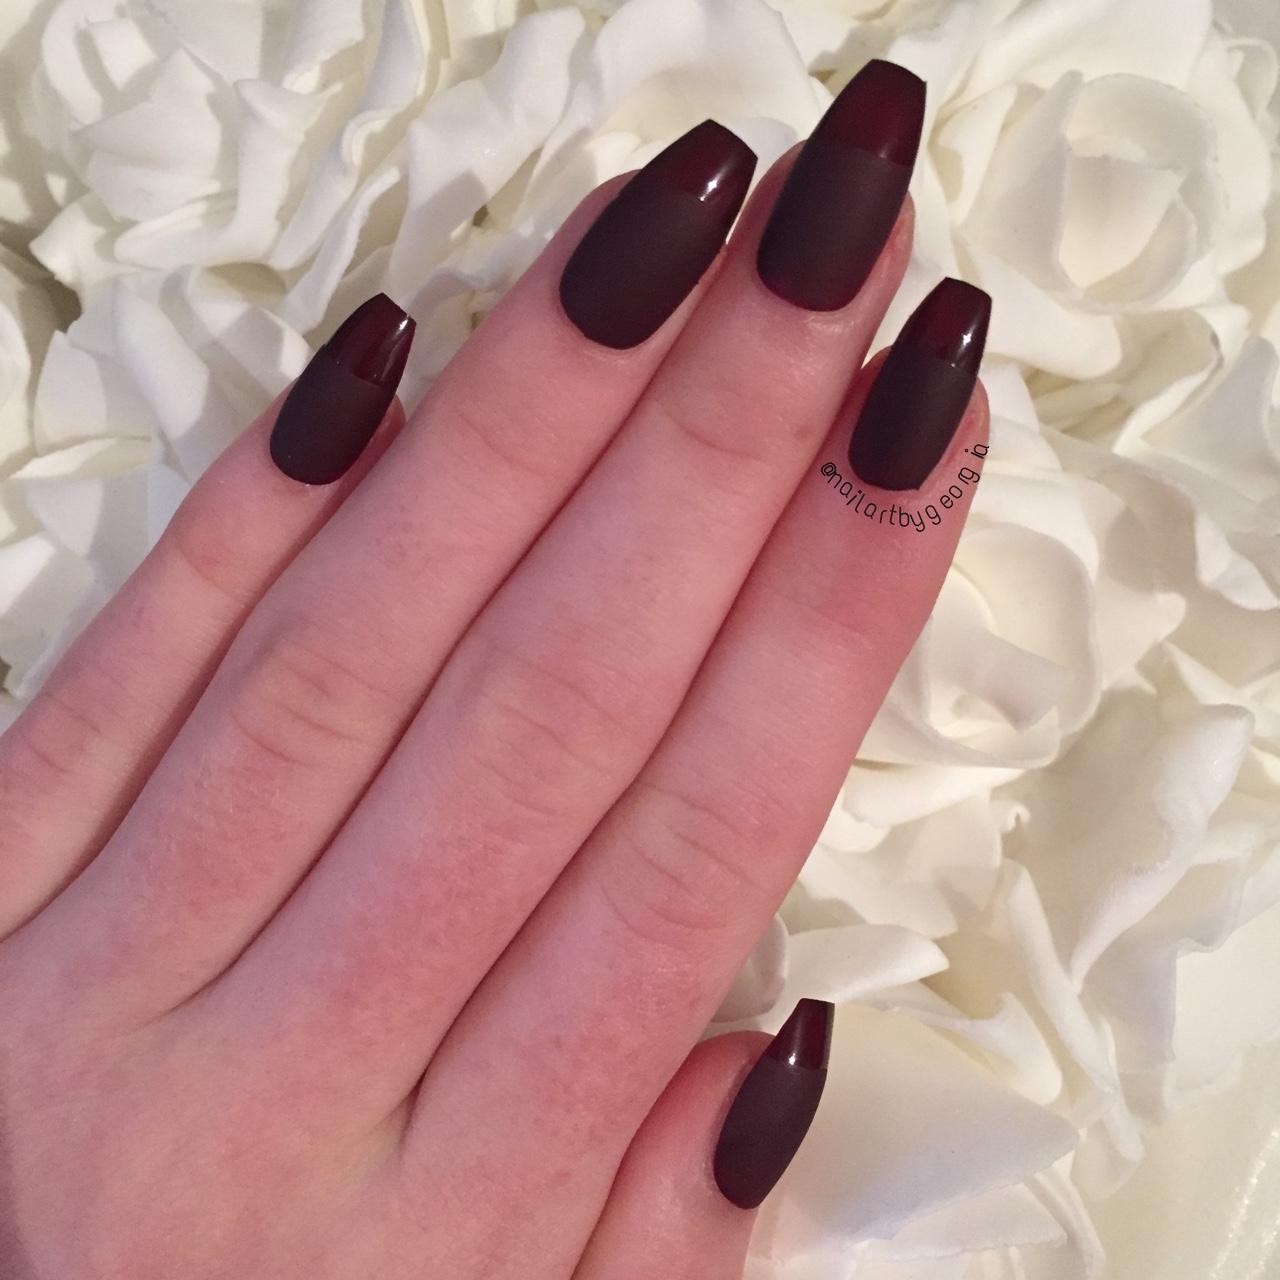 60 Rose Gold Burgundy Nail Design Ideas for Any Occasion